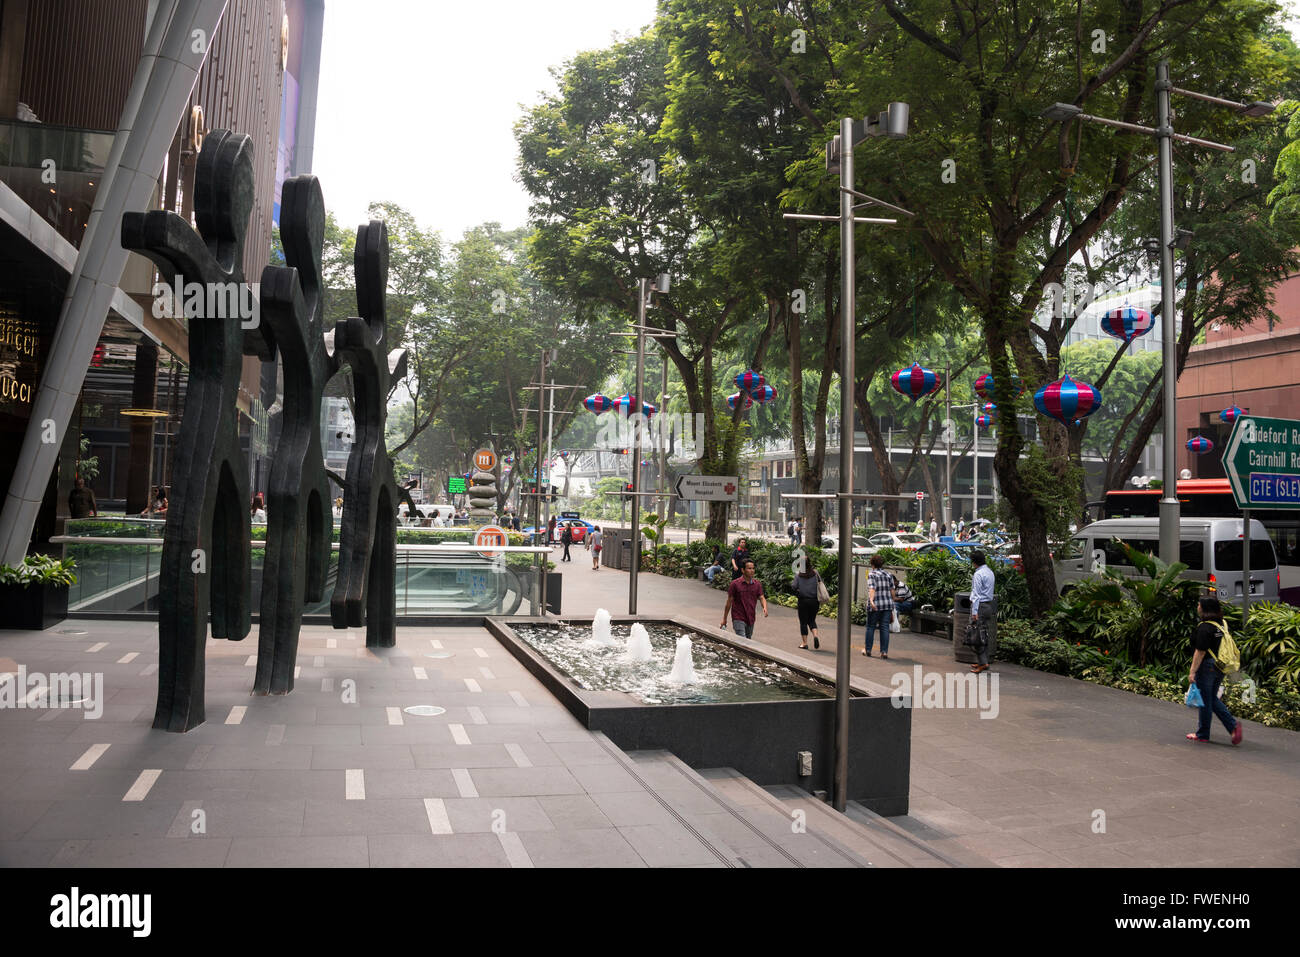 One of the many contemporary art metal sculptures along Orchard Road in Singapore. Orchard Road consists of upmarket restaurants, eateries and top Stock Photo